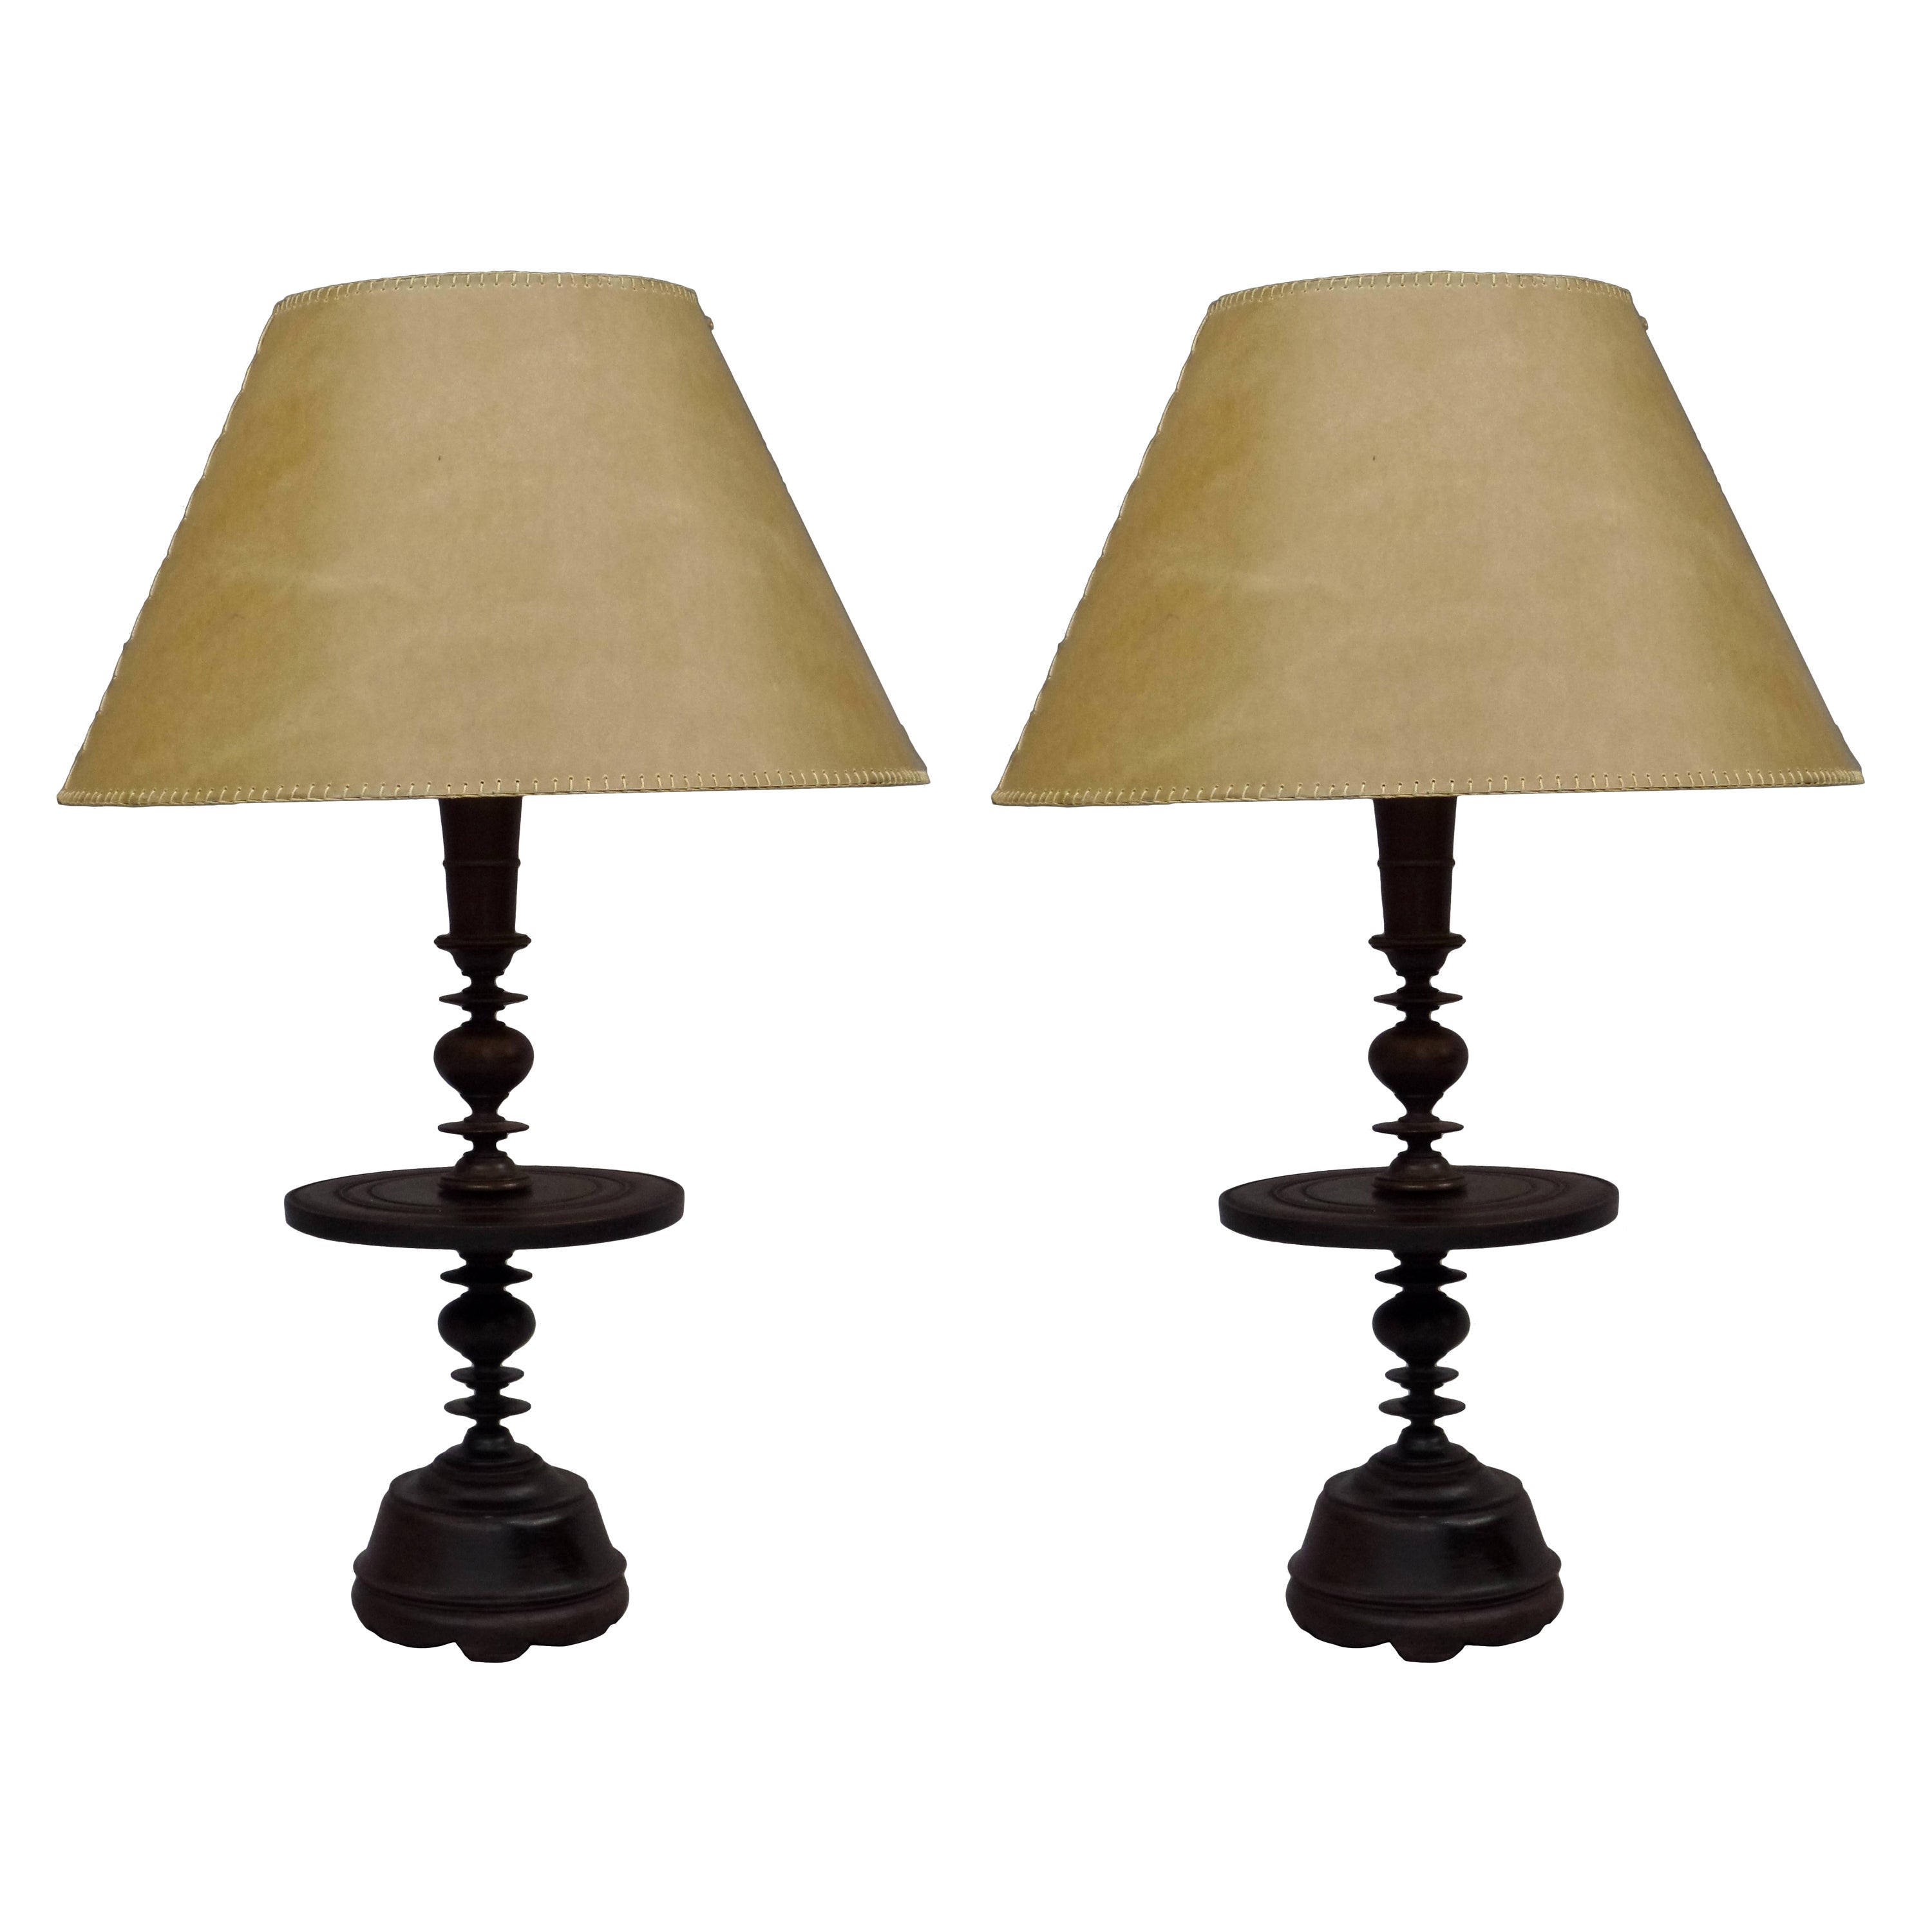 Pair of French Colonial Mid-Century Carved Wood Table Lamp Bases, 1930 For Sale